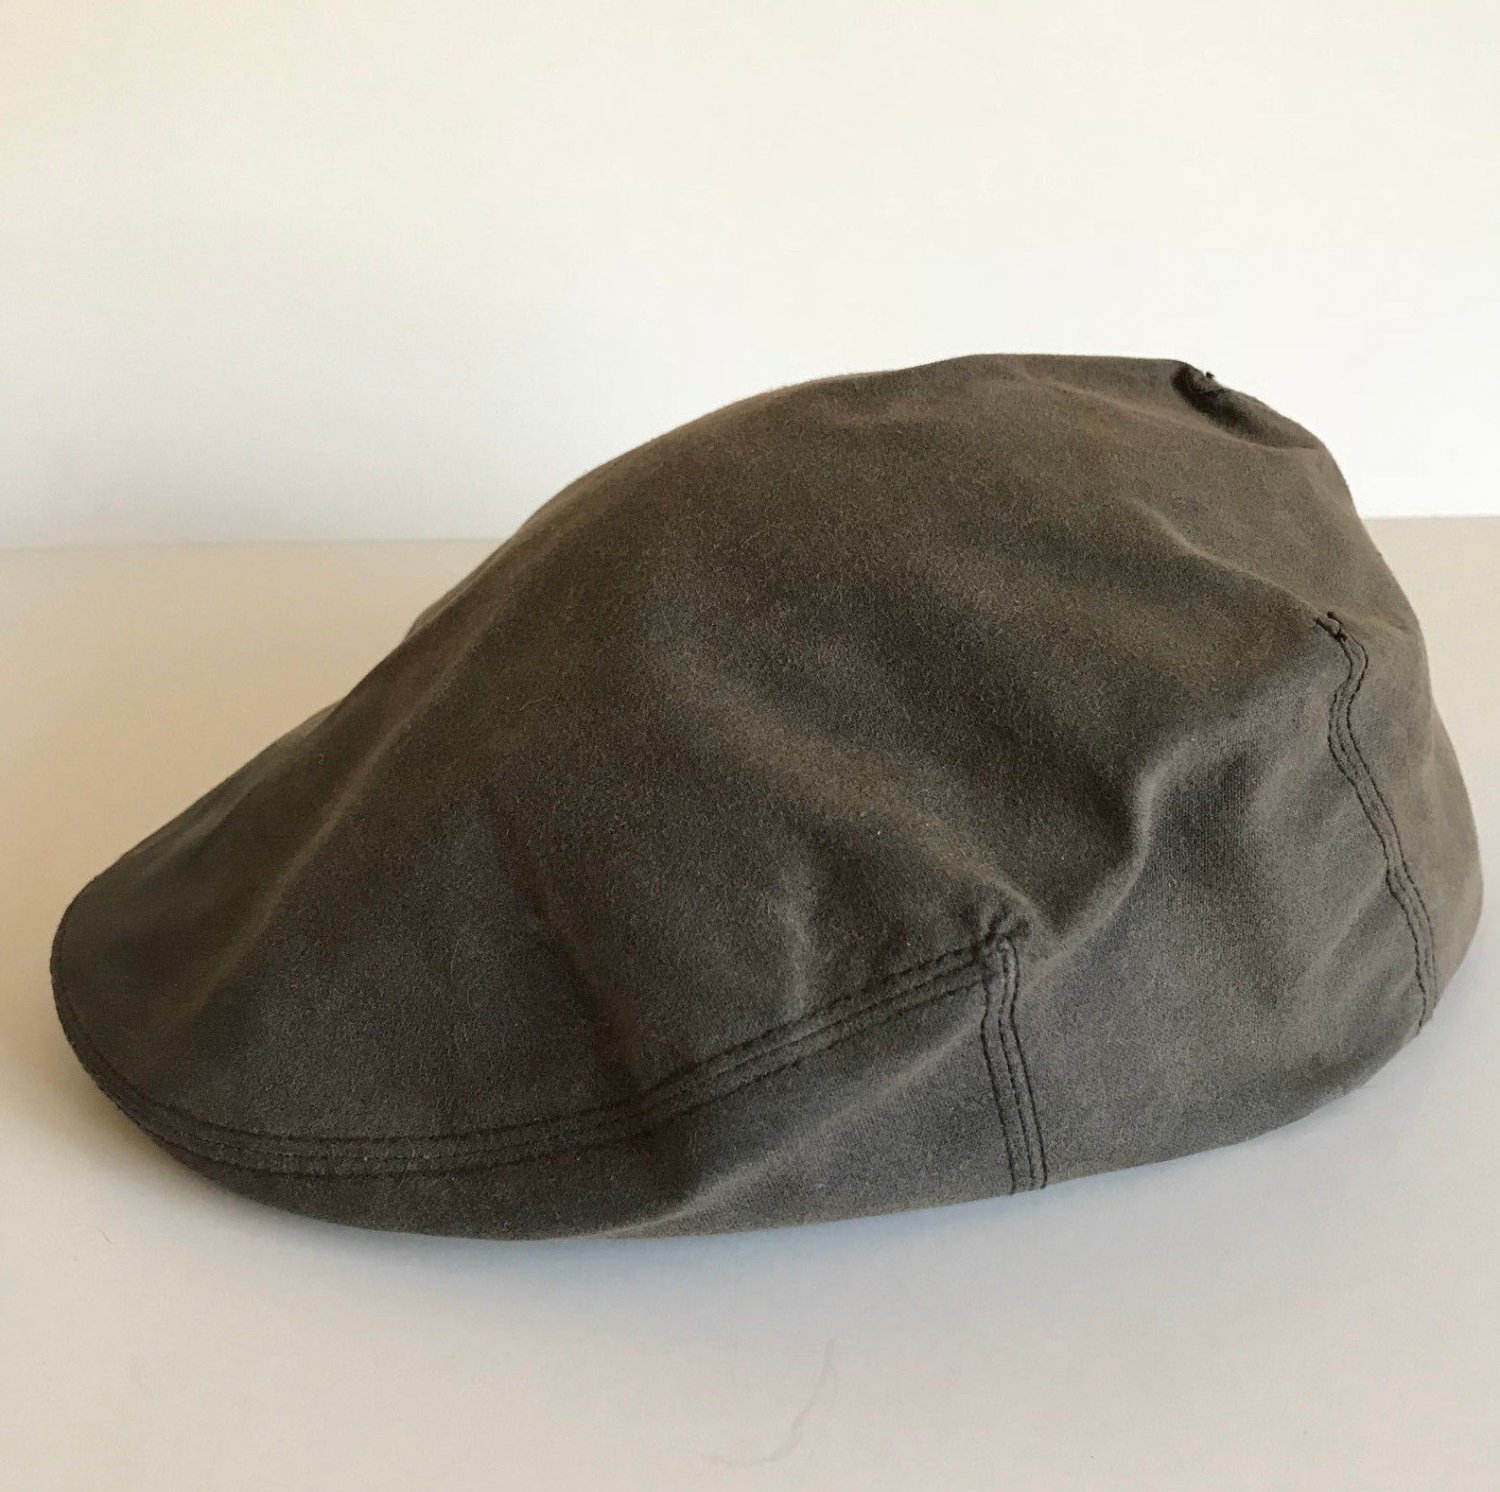 Duluth Trading Company Distressed Cotton Newsboy Cabby Mens Cap Hat Large